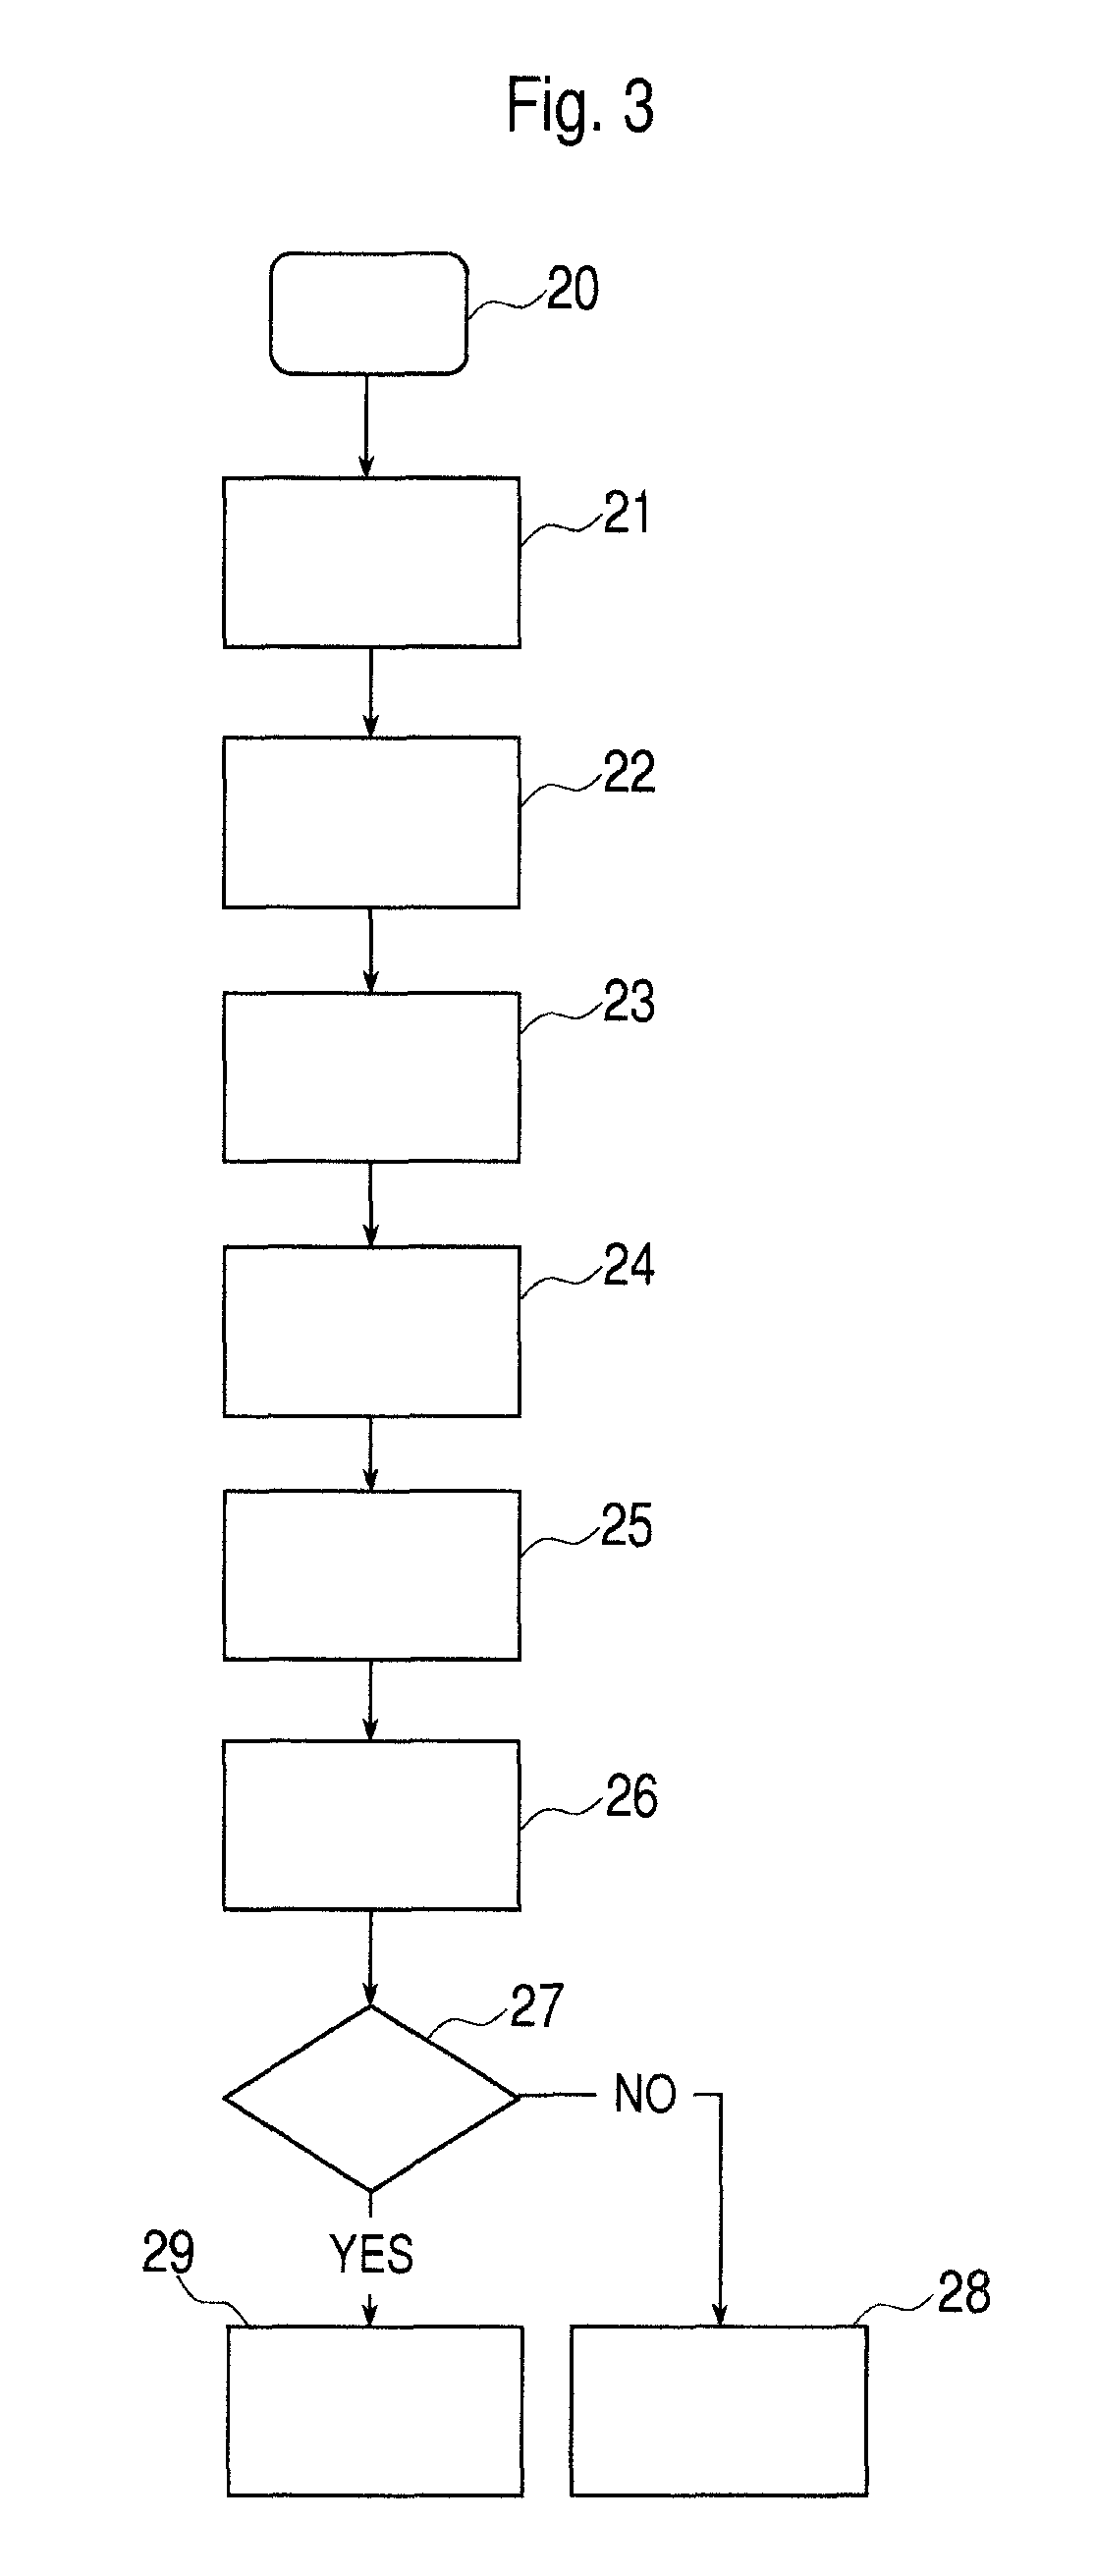 Method of writing data to a memory device and reading data from the memory device